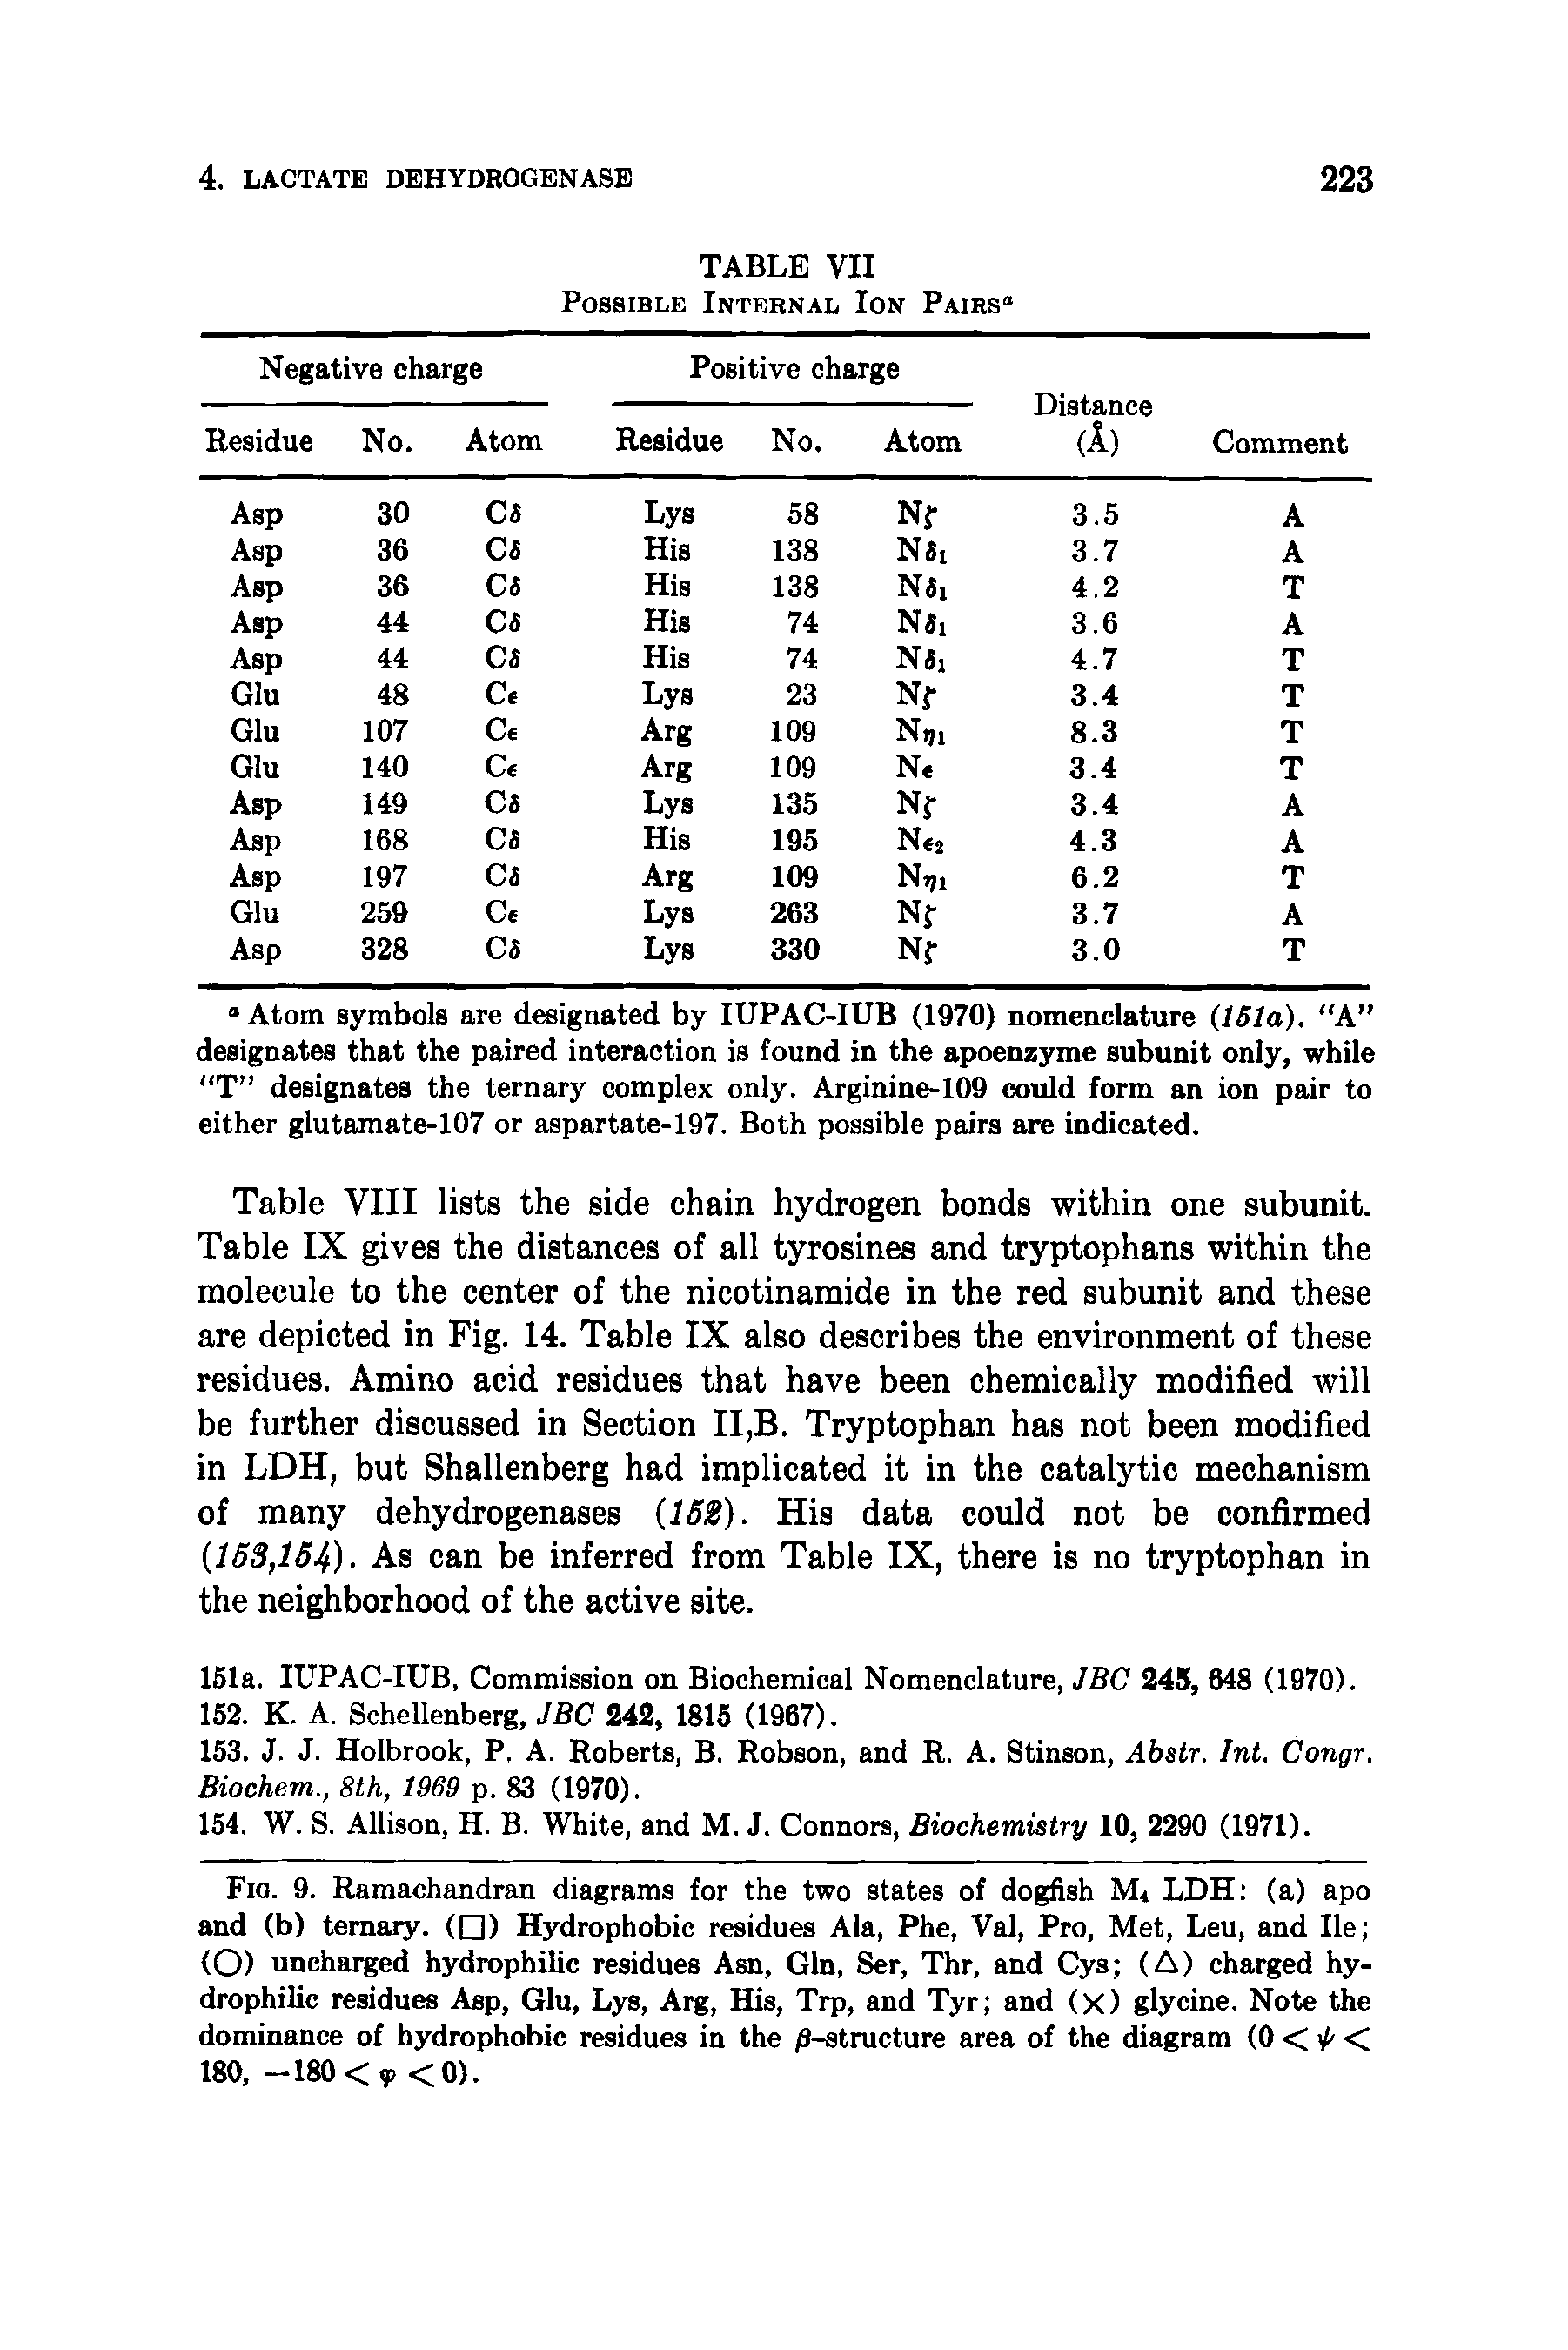 Table VIII lists the side chain hydrogen bonds within one subunit. Table IX gives the distances of all tyrosines and tryptophans within the molecule to the center of the nicotinamide in the red subunit and these are depicted in Fig. 14. Table IX also describes the environment of these residues. Amino acid residues that have been chemically modified will be further discussed in Section II,B. Tryptophan has not been modified in LDH, but Shallenberg had implicated it in the catalytic mechanism of many dehydrogenases (152). His data could not be confirmed (153,154). As can be inferred from Table IX, there is no tryptophan in the neighborhood of the active site.